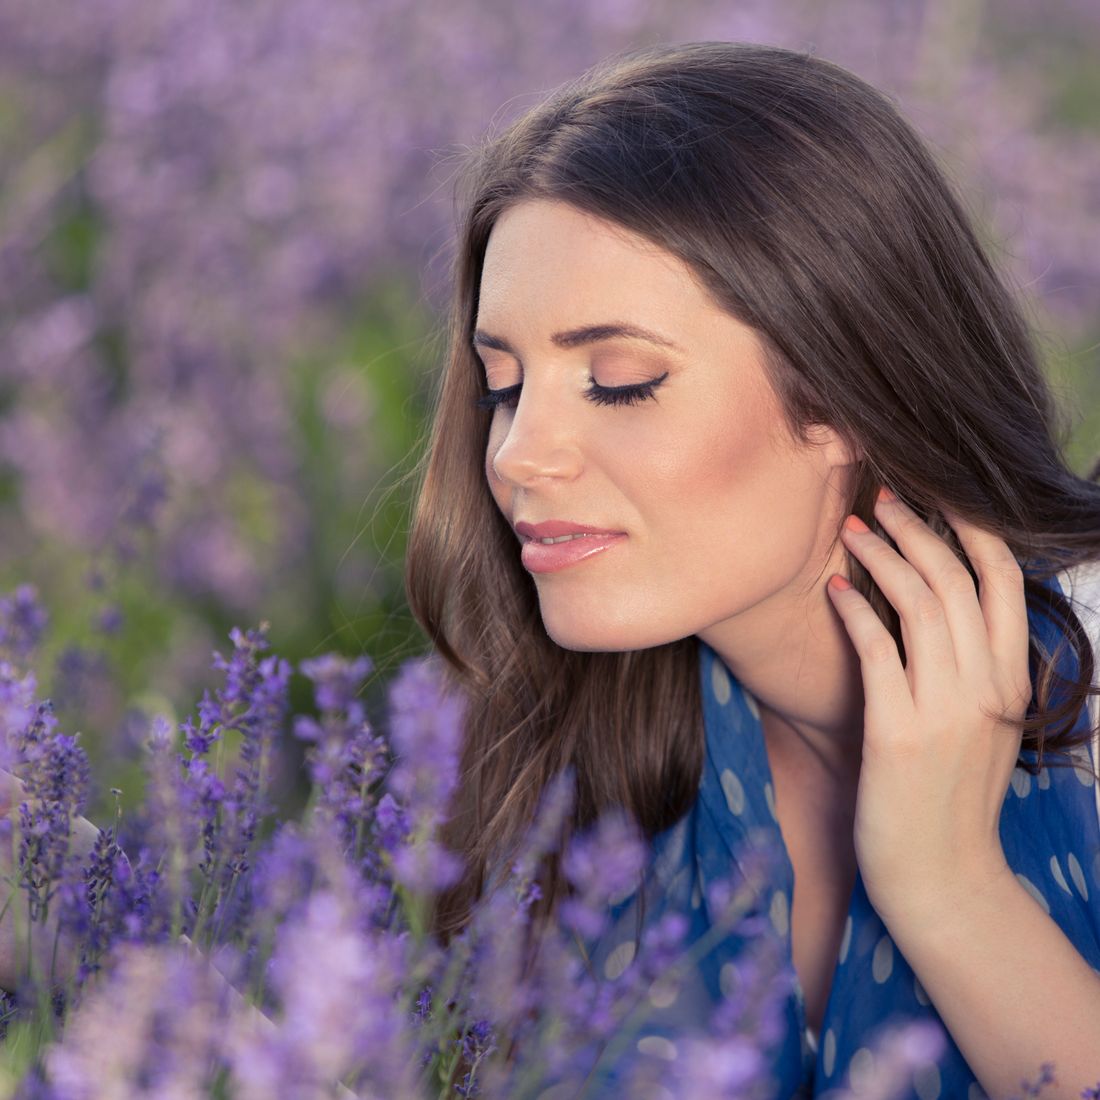 THE POWER OF SCENT: HOW FRAGRANCE CAN AFFECT YOUR EMOTIONS